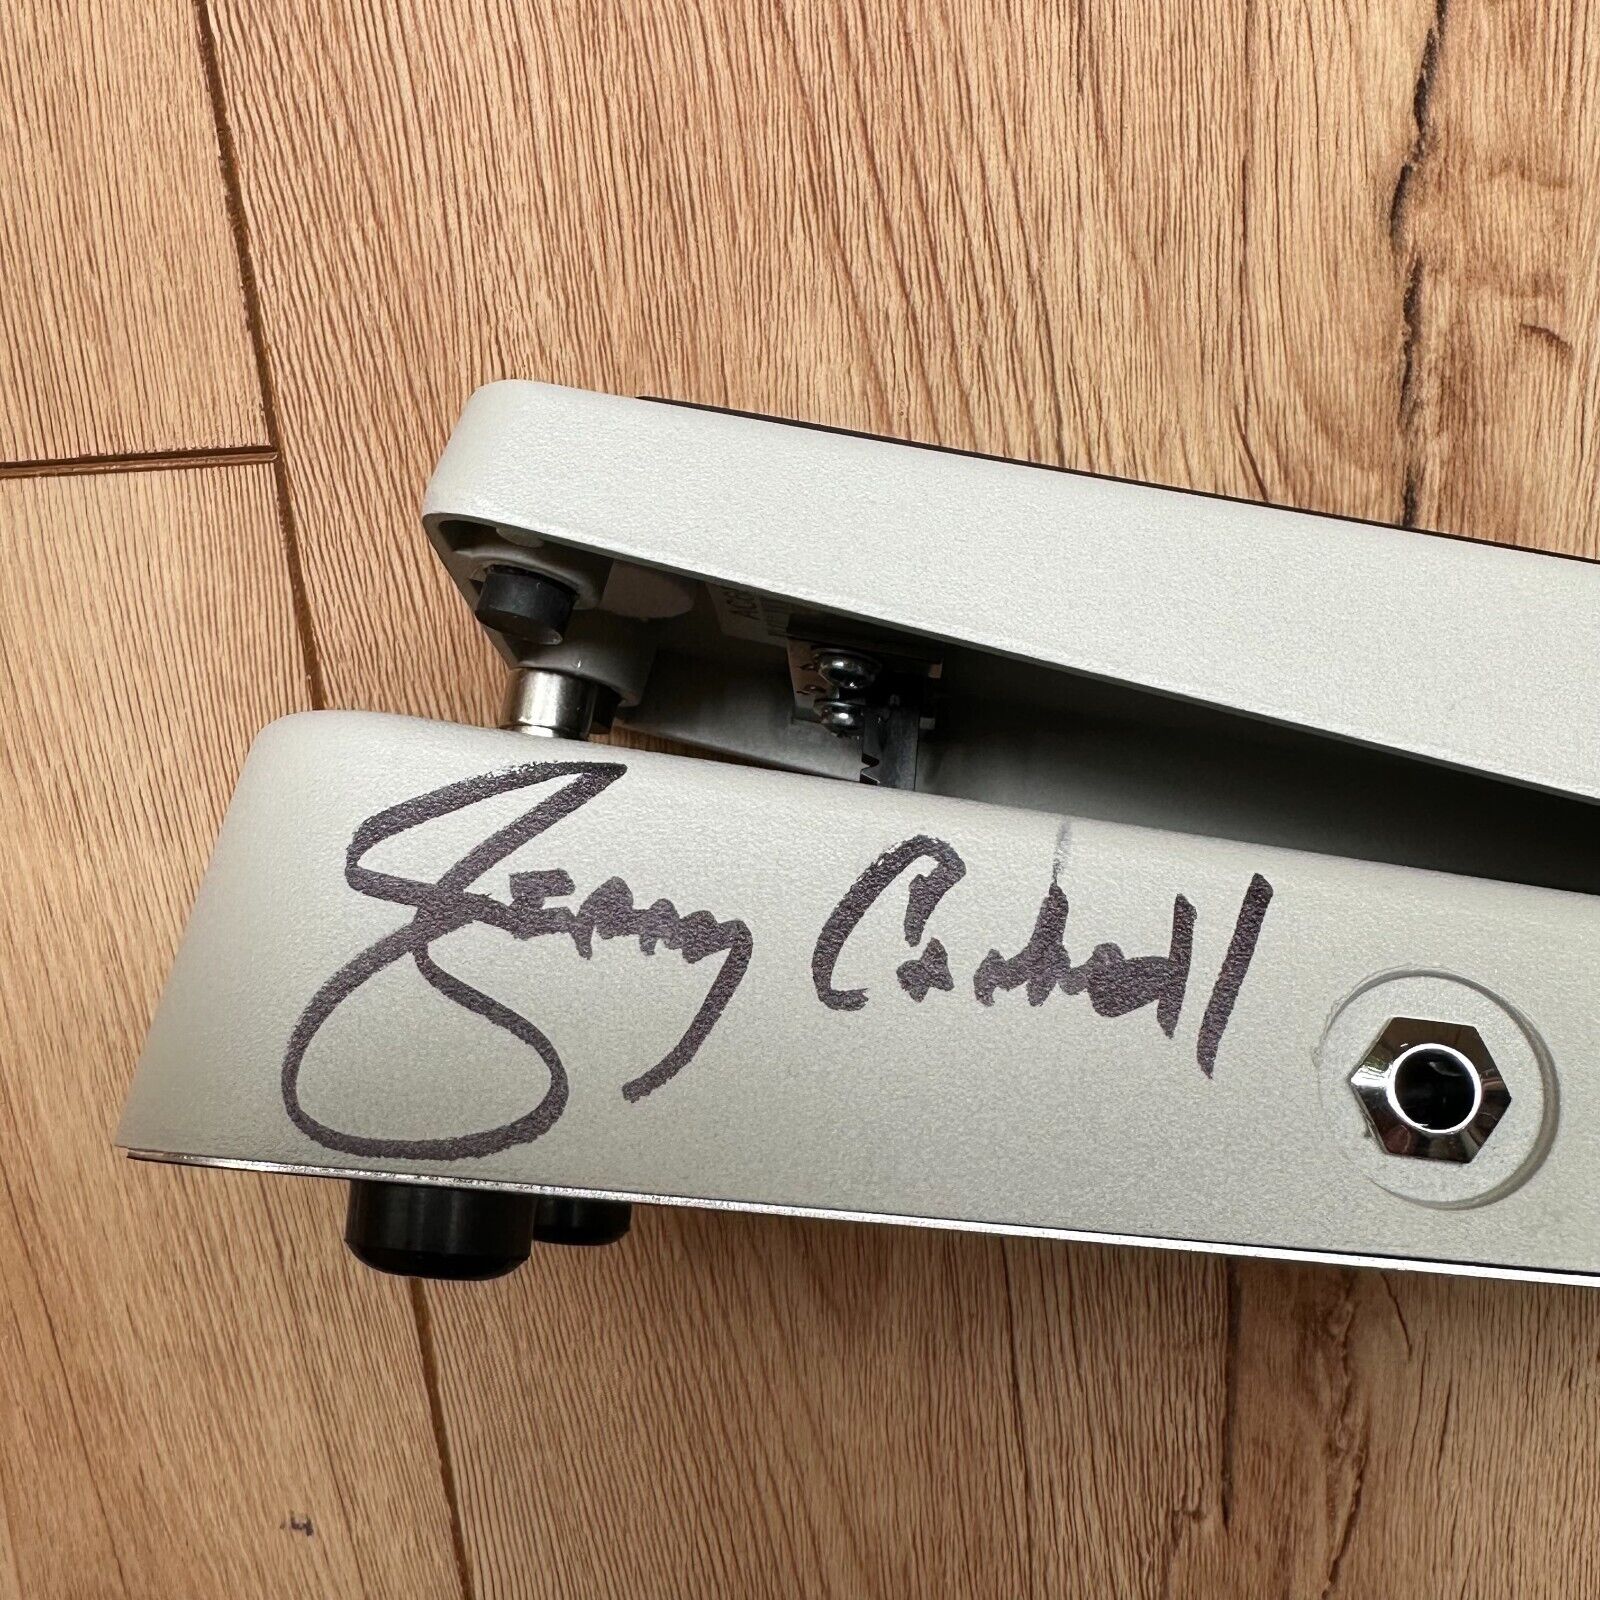  Jerry Cantrell SIGNED Firefly Cry Baby White Wah Pedal Jim Dunlop JC95FF